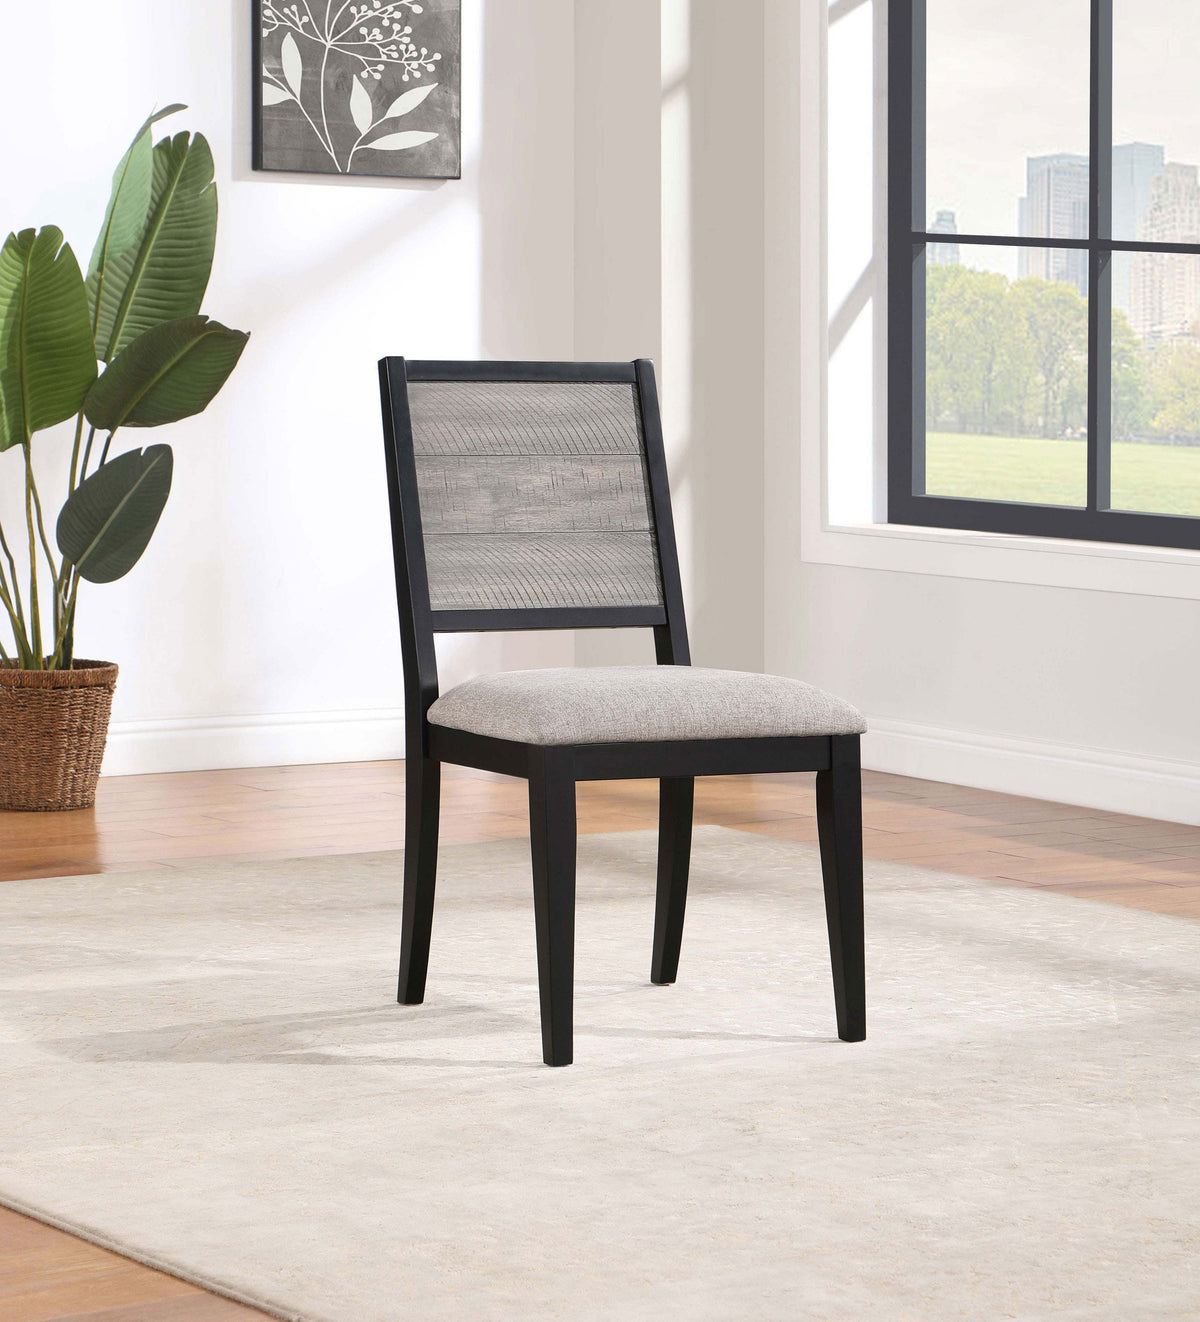 Elodie Upholstered Padded Seat Dining Side Chair Dove Grey and Black (Set of 2)  Half Price Furniture